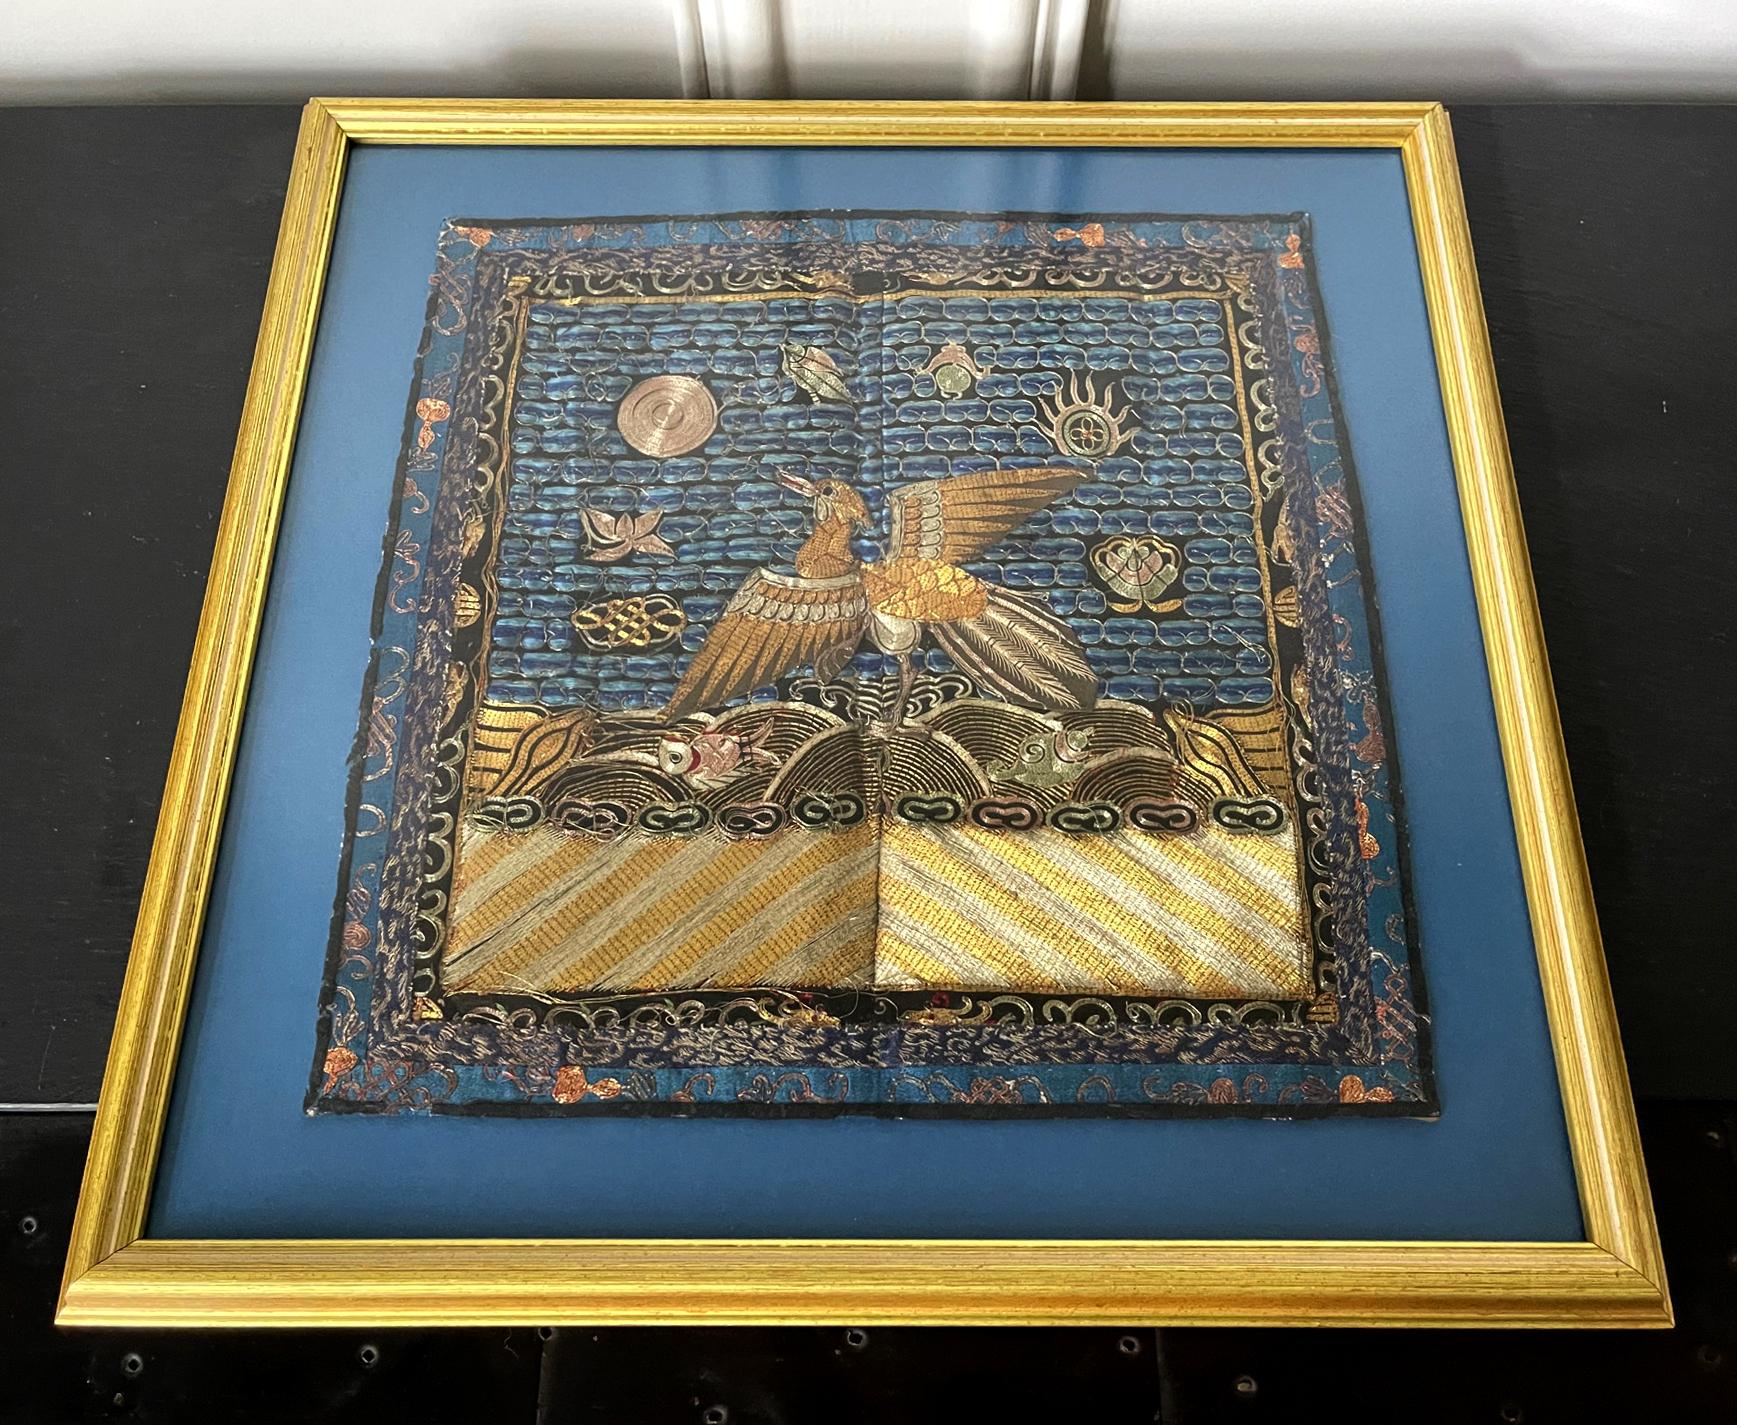 A finely embroidered silk civil rank badge panel presented in a giltwood frame circa mid-late 19th century. The square rank badge is known in Chinese as Buzi. The design is centered by a golden peasant, the symbol of the second rank official in the